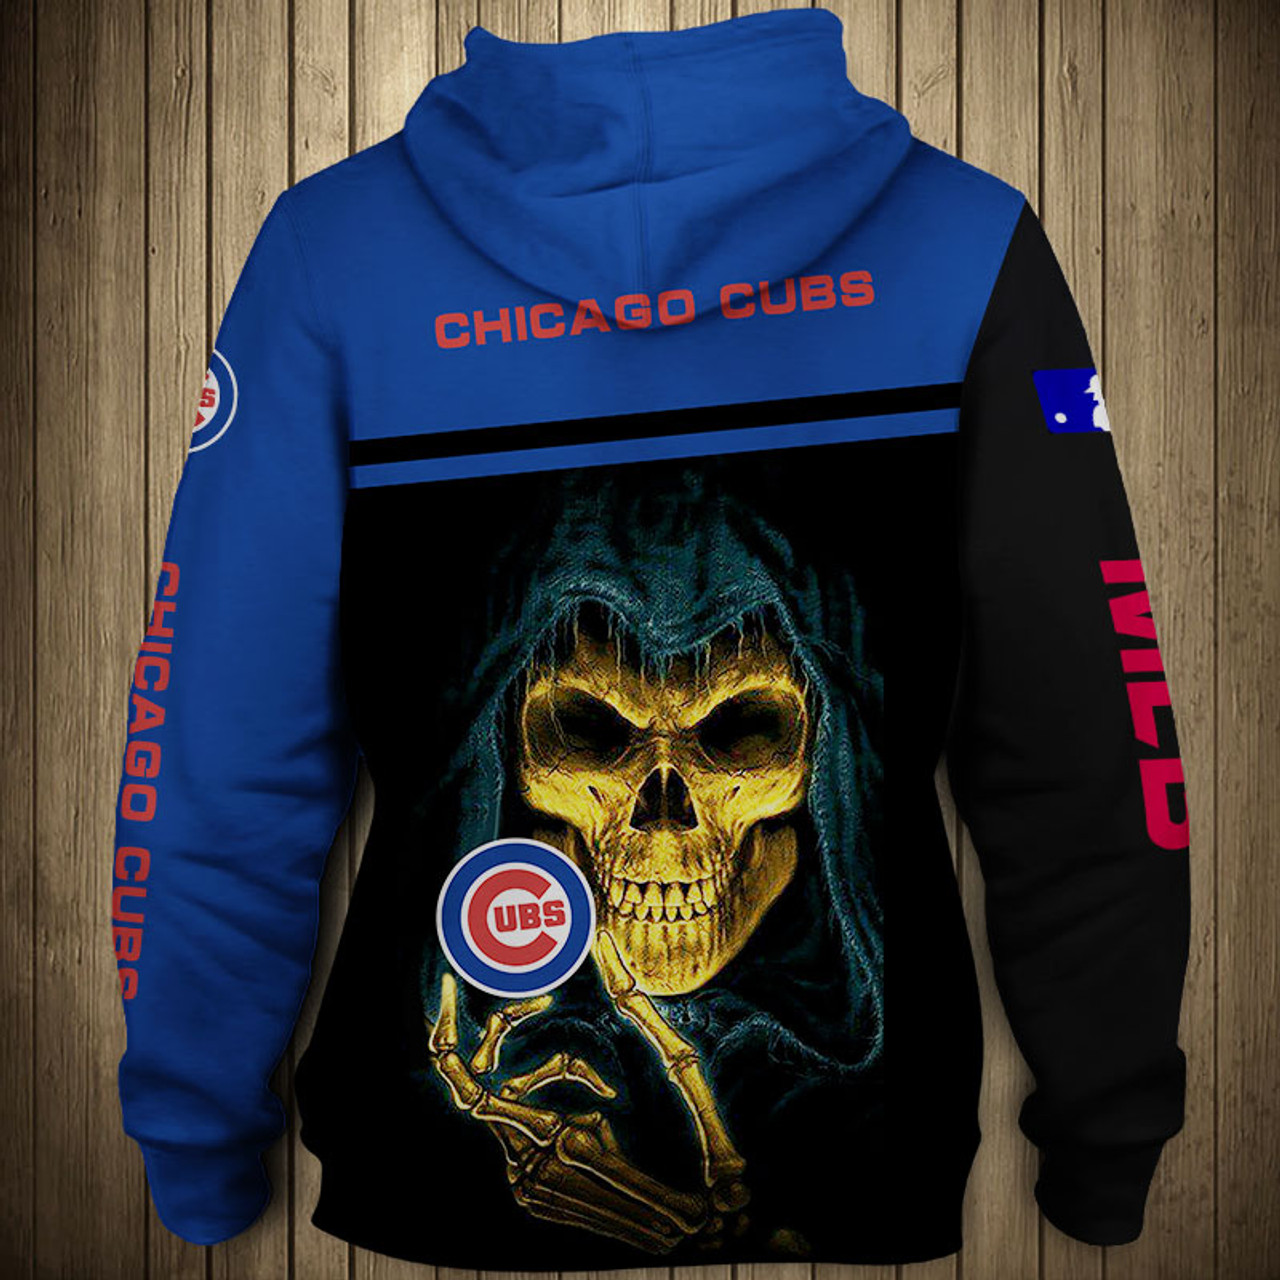 **(OFFICIAL-M.L.B.CHICAGO-CUBS-TEAM-ZIPPERED-HOODIES/NICE-CUSTOM-DETAILED-3D-GRAPHIC-PRINTED/PREMIUM-ALL-OVER-DOUBLE-SIDED-PRINT/OFFICIAL-CUBS-TEAM-COLORS & CLASSIC-CUBS-3D-GRAPHIC-LOGOS/TRENDY-NEW-PREMIUM-M.L.B.CUBS-ZIPPERED-HOODIES)** 